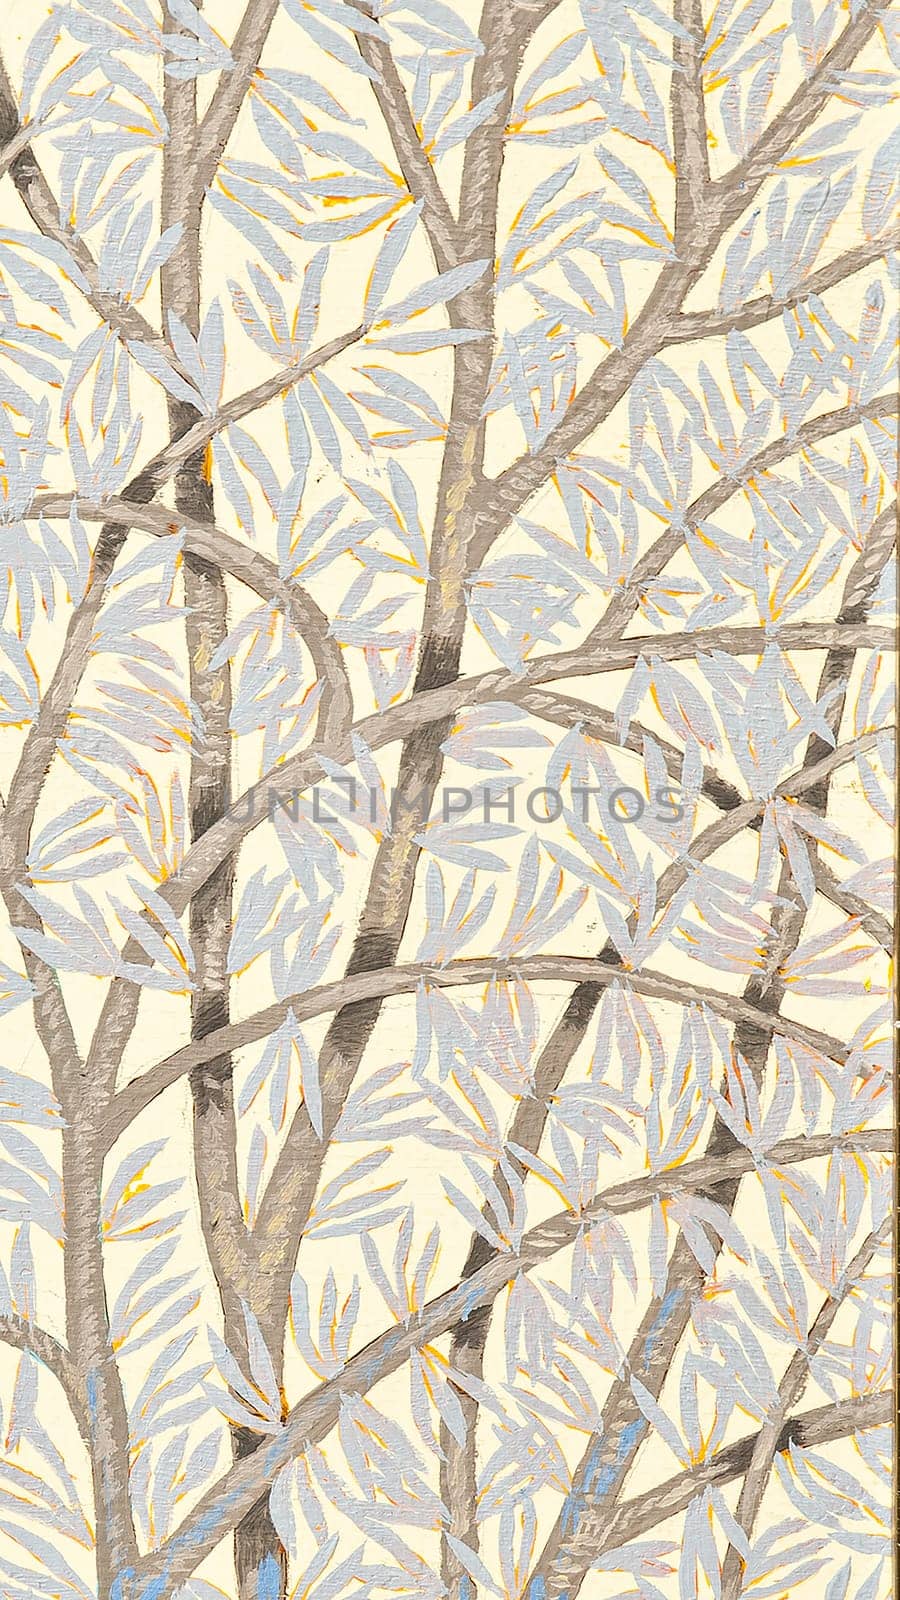 A vertical illustrated design of tree branches with leaves on a beige background by A_Karim